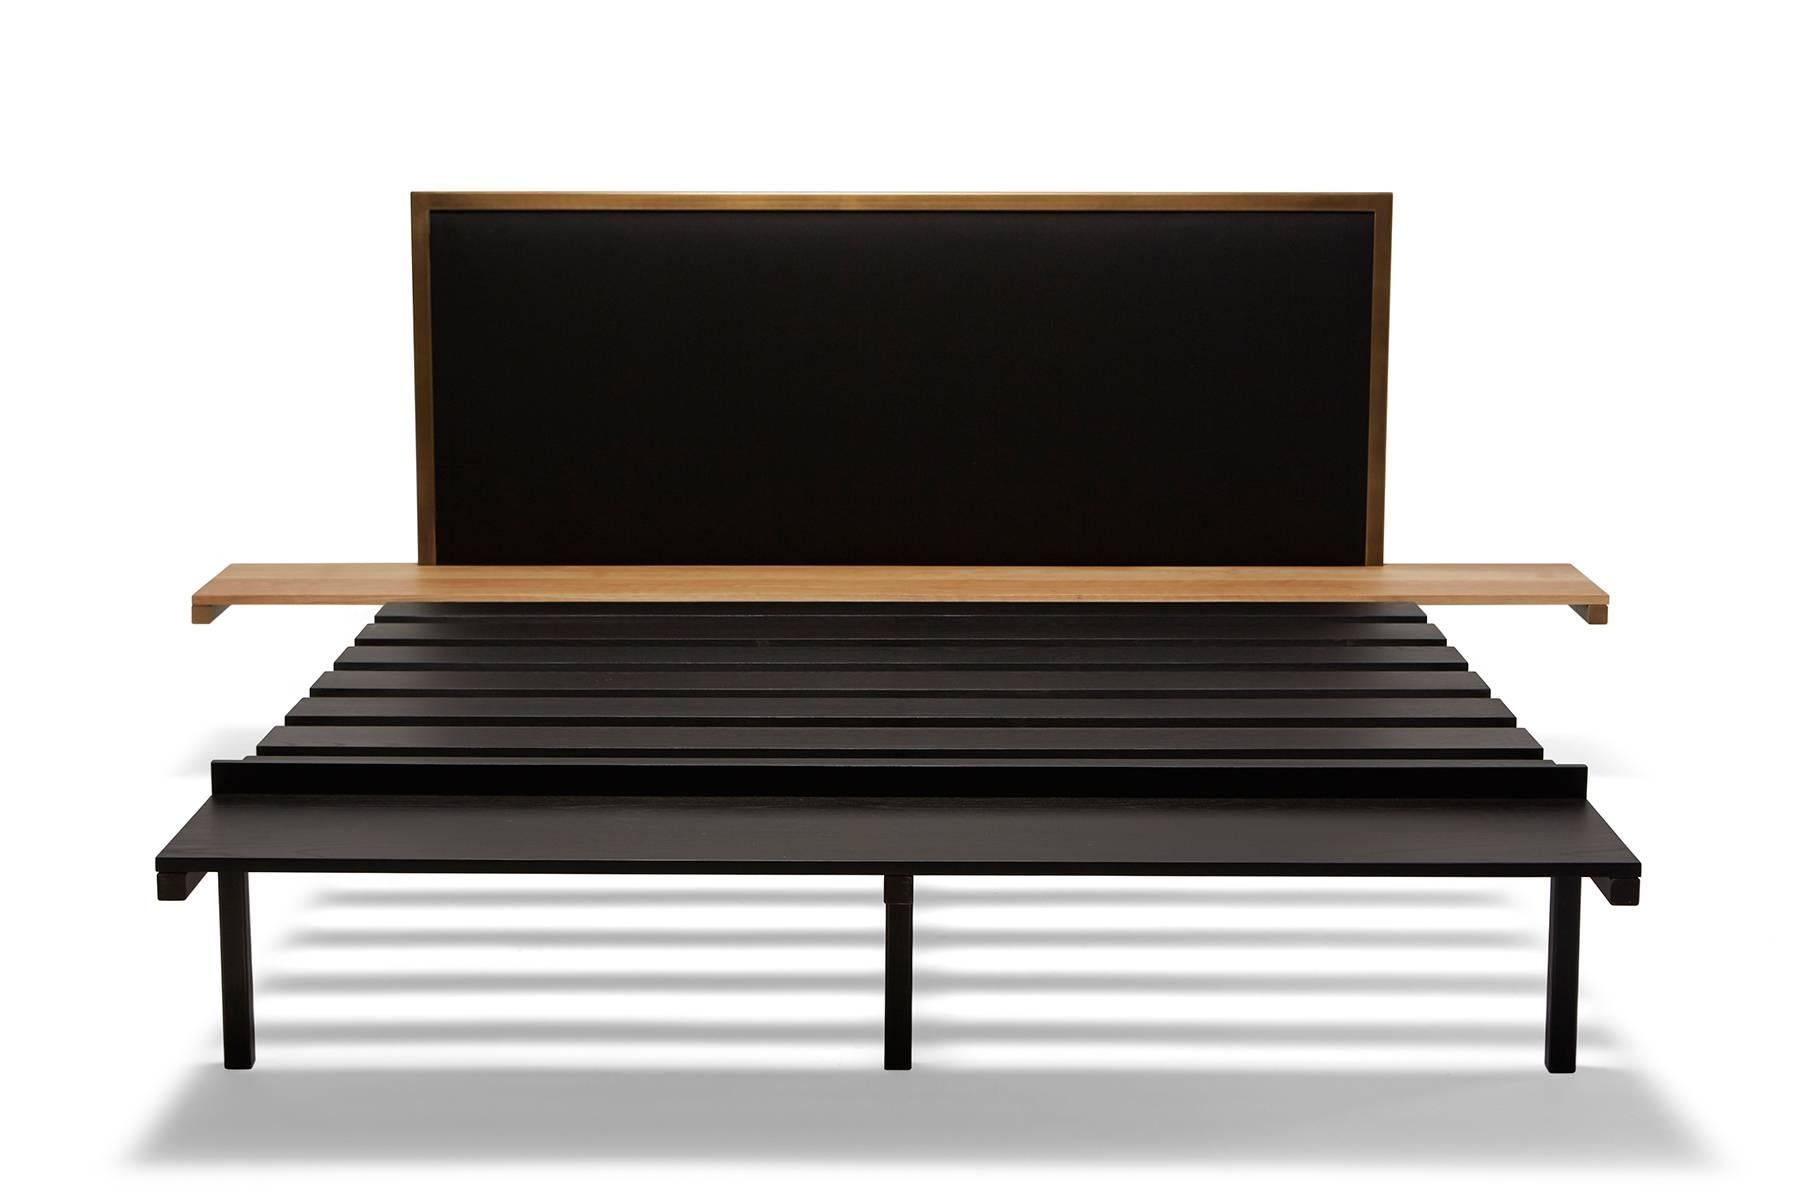 New for Stephen Kenn in 2016 is the Inheritance bed. The frame is tube steel in blackened steel and brass, with a charcoal wool headboard and oak and ebonized oak side table and bench. The side tables and bench are integrated into the frame of the